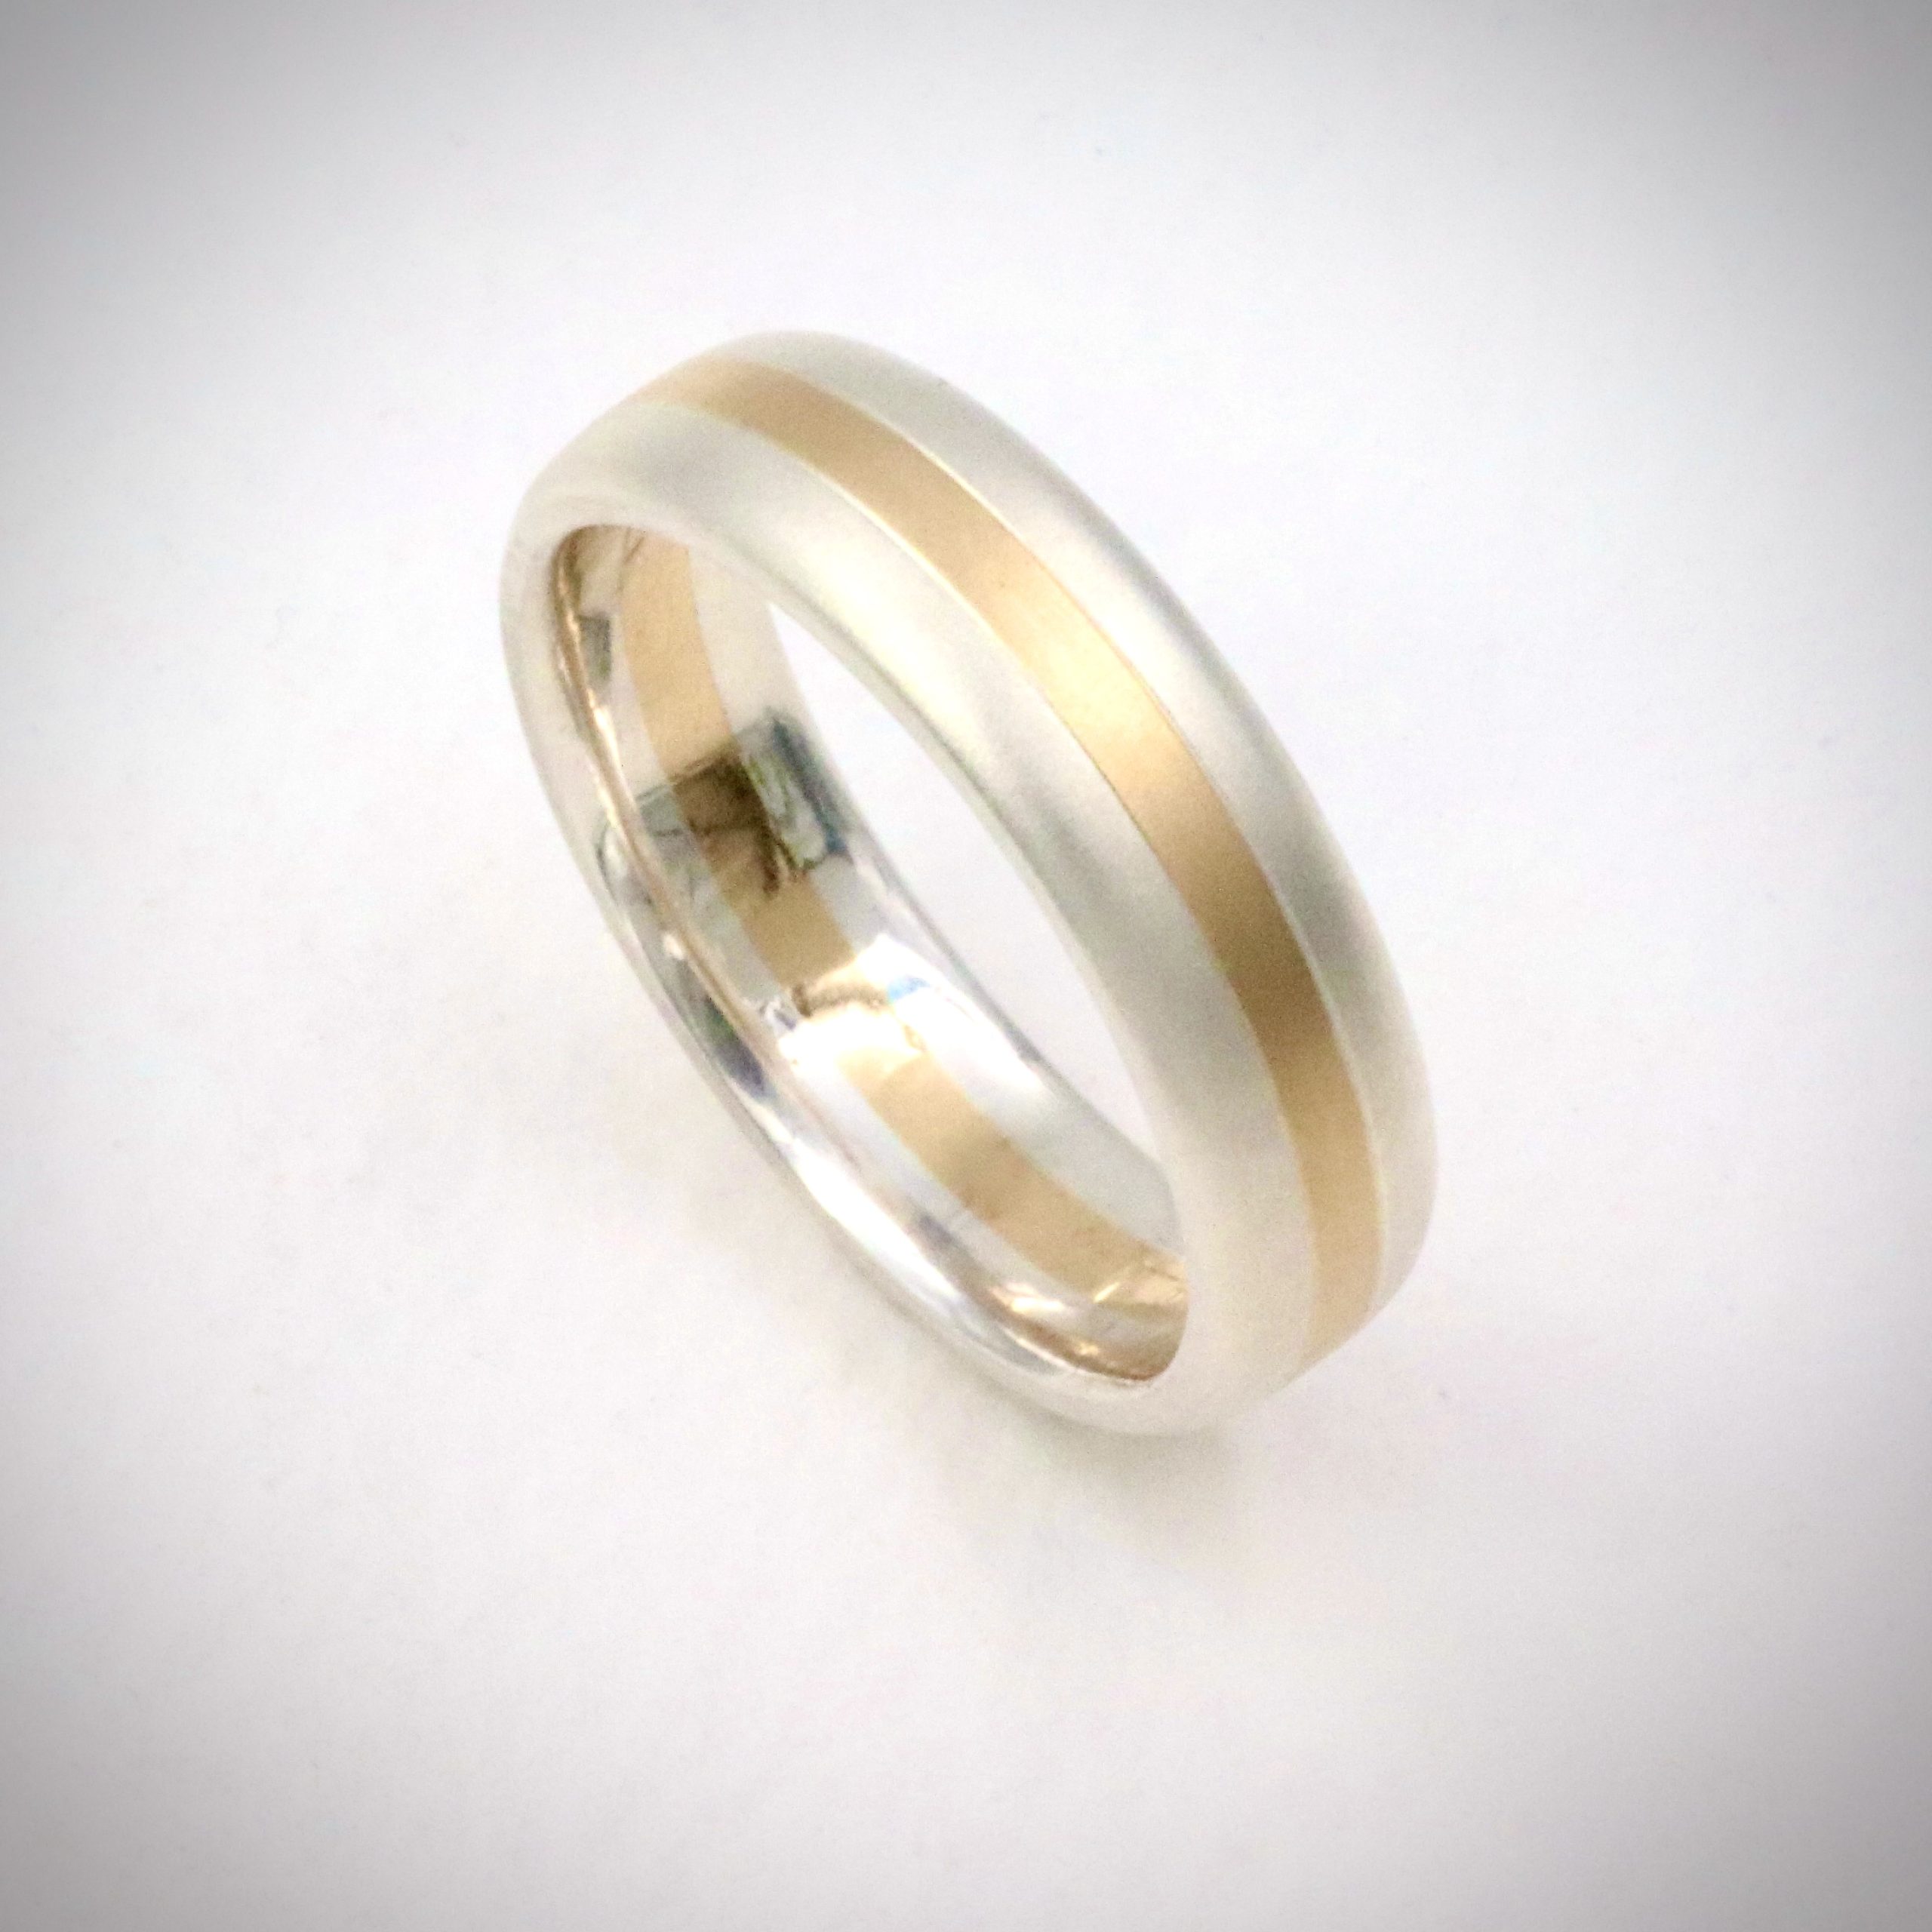 Gold and Silver Wedding Ring